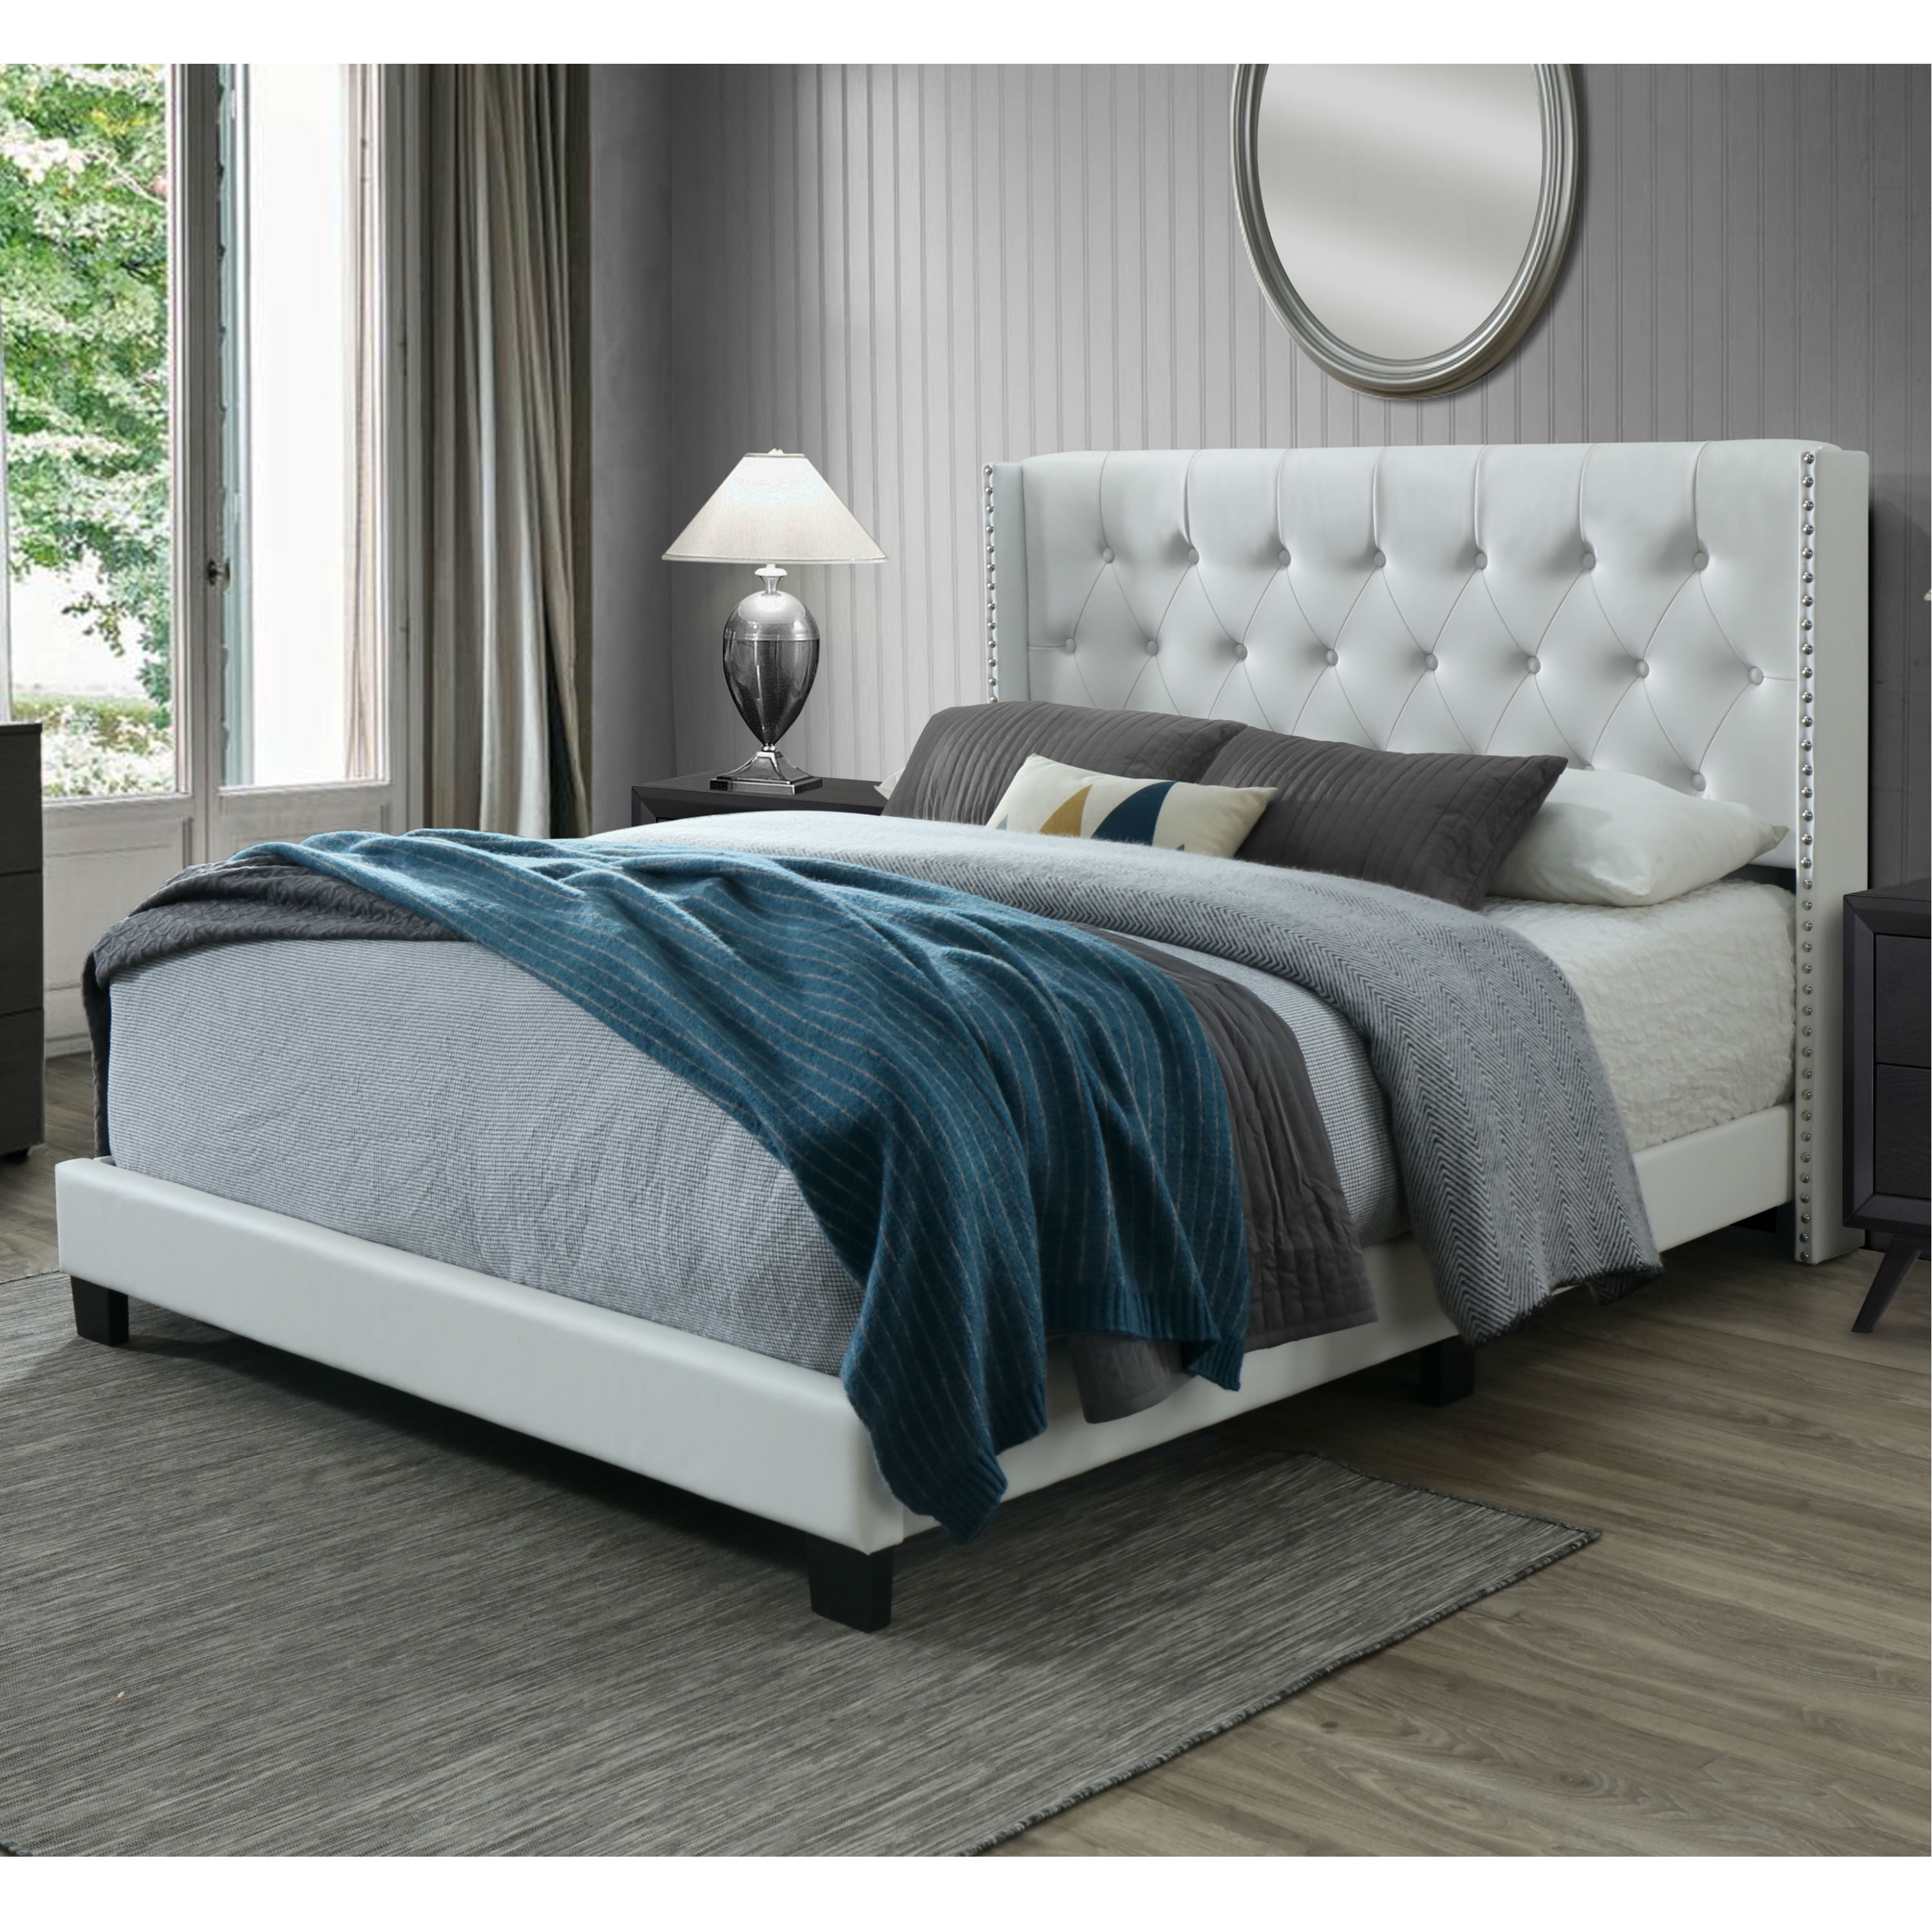 Panel Bed Frame Queen Size, Headboard White Leather